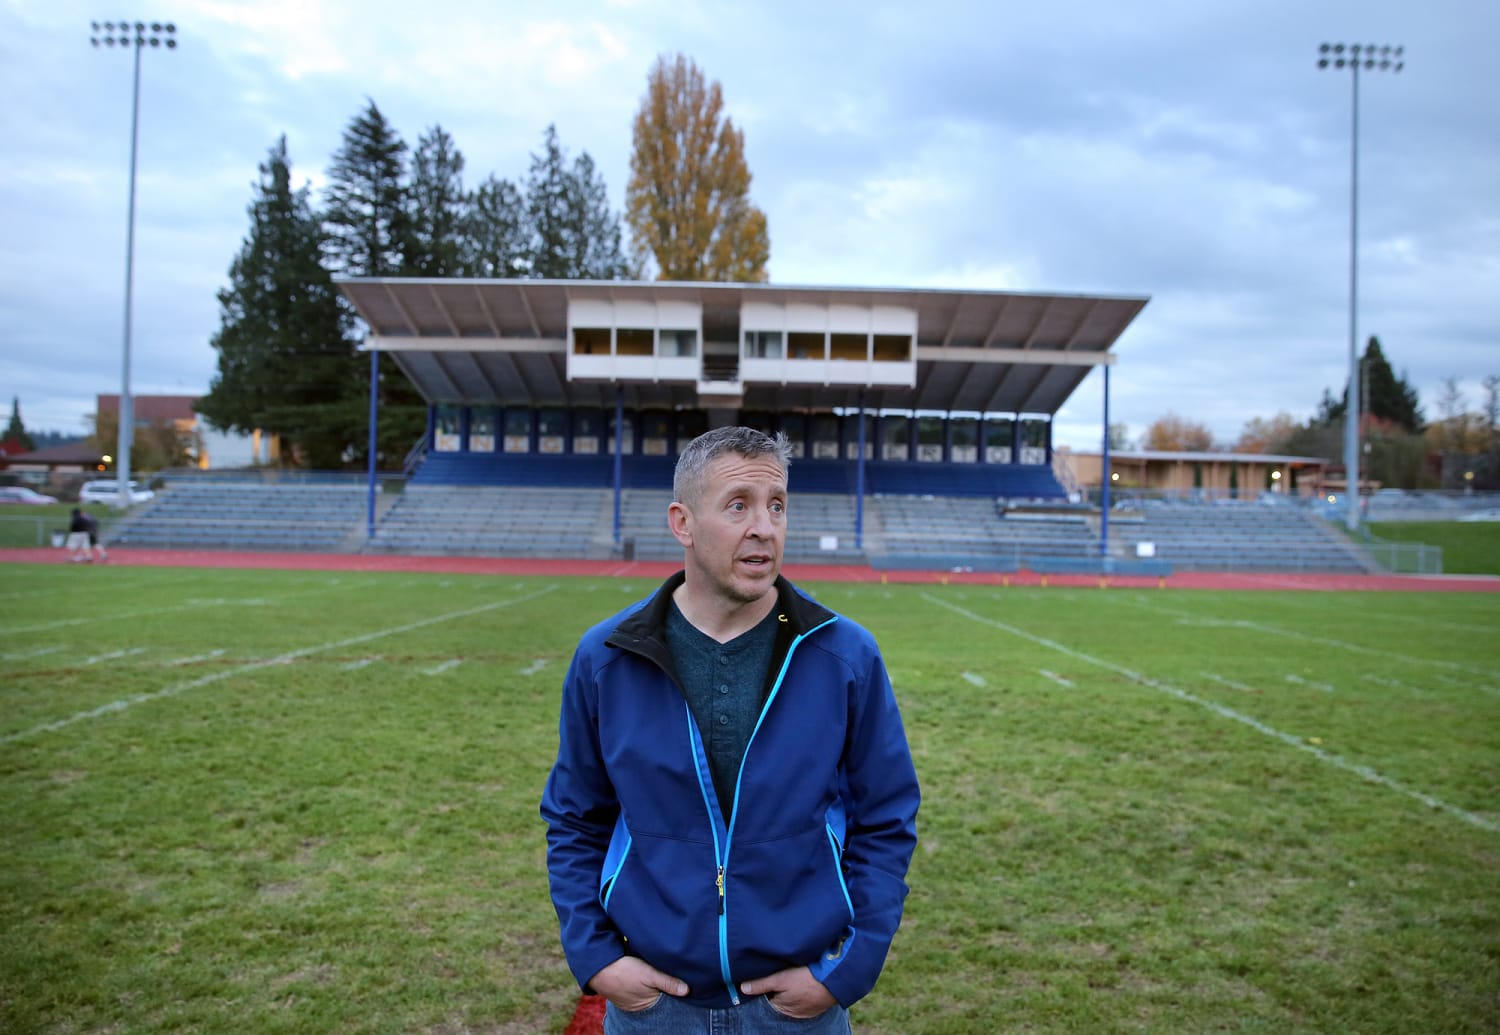 Appeals Court Rejects Former Bremerton Coach Joe Kennedy’s Lawsuit Over Prayer at Football Games